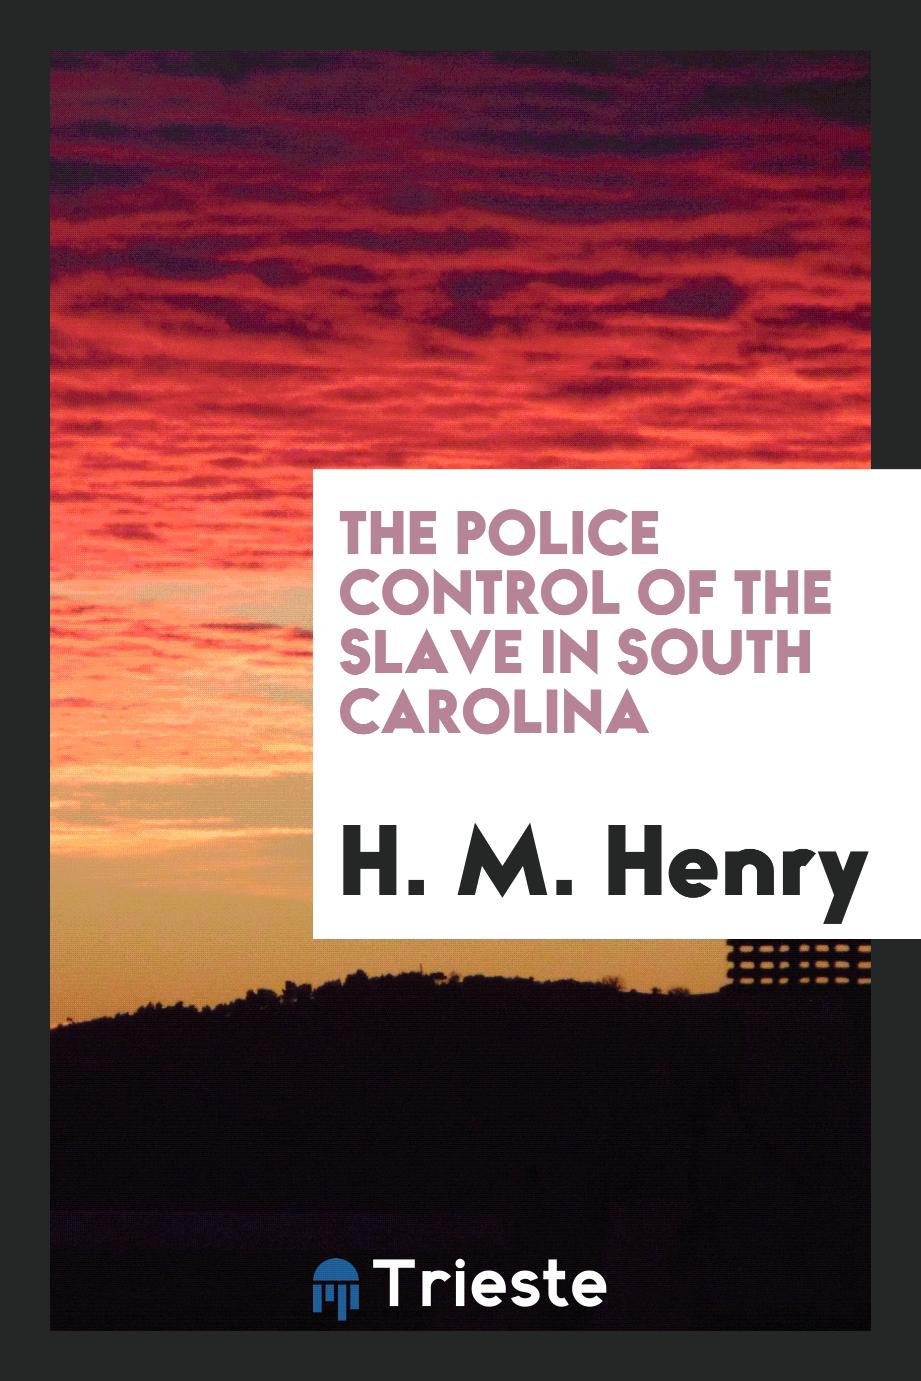 The police control of the slave in South Carolina